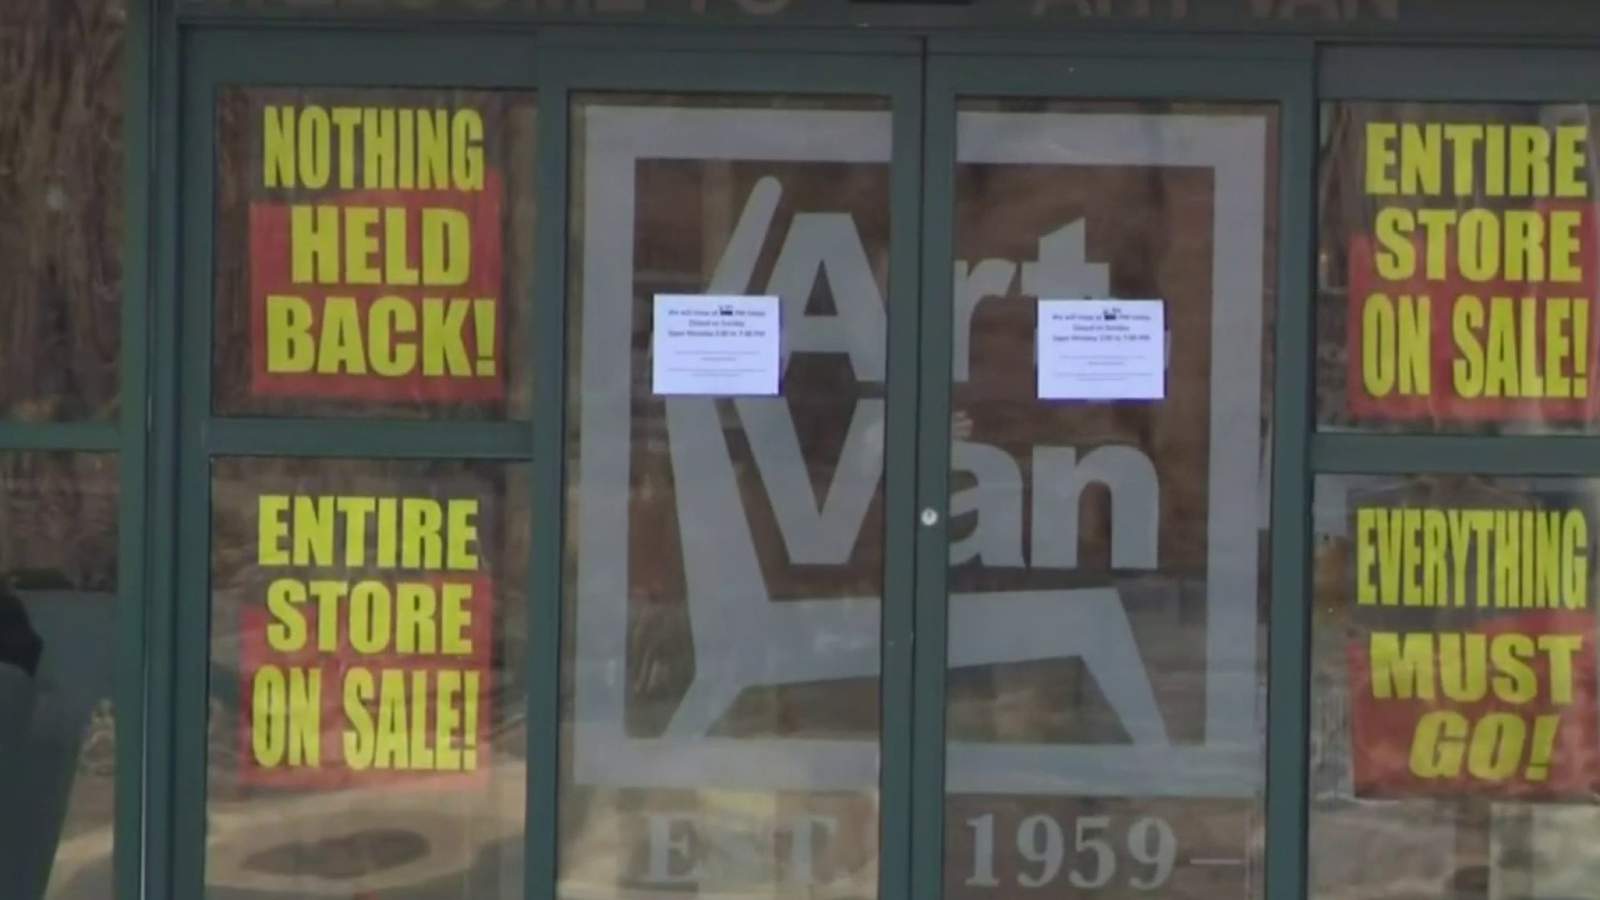 Art Van Furniture officially files for Chapter 11 bankruptcy